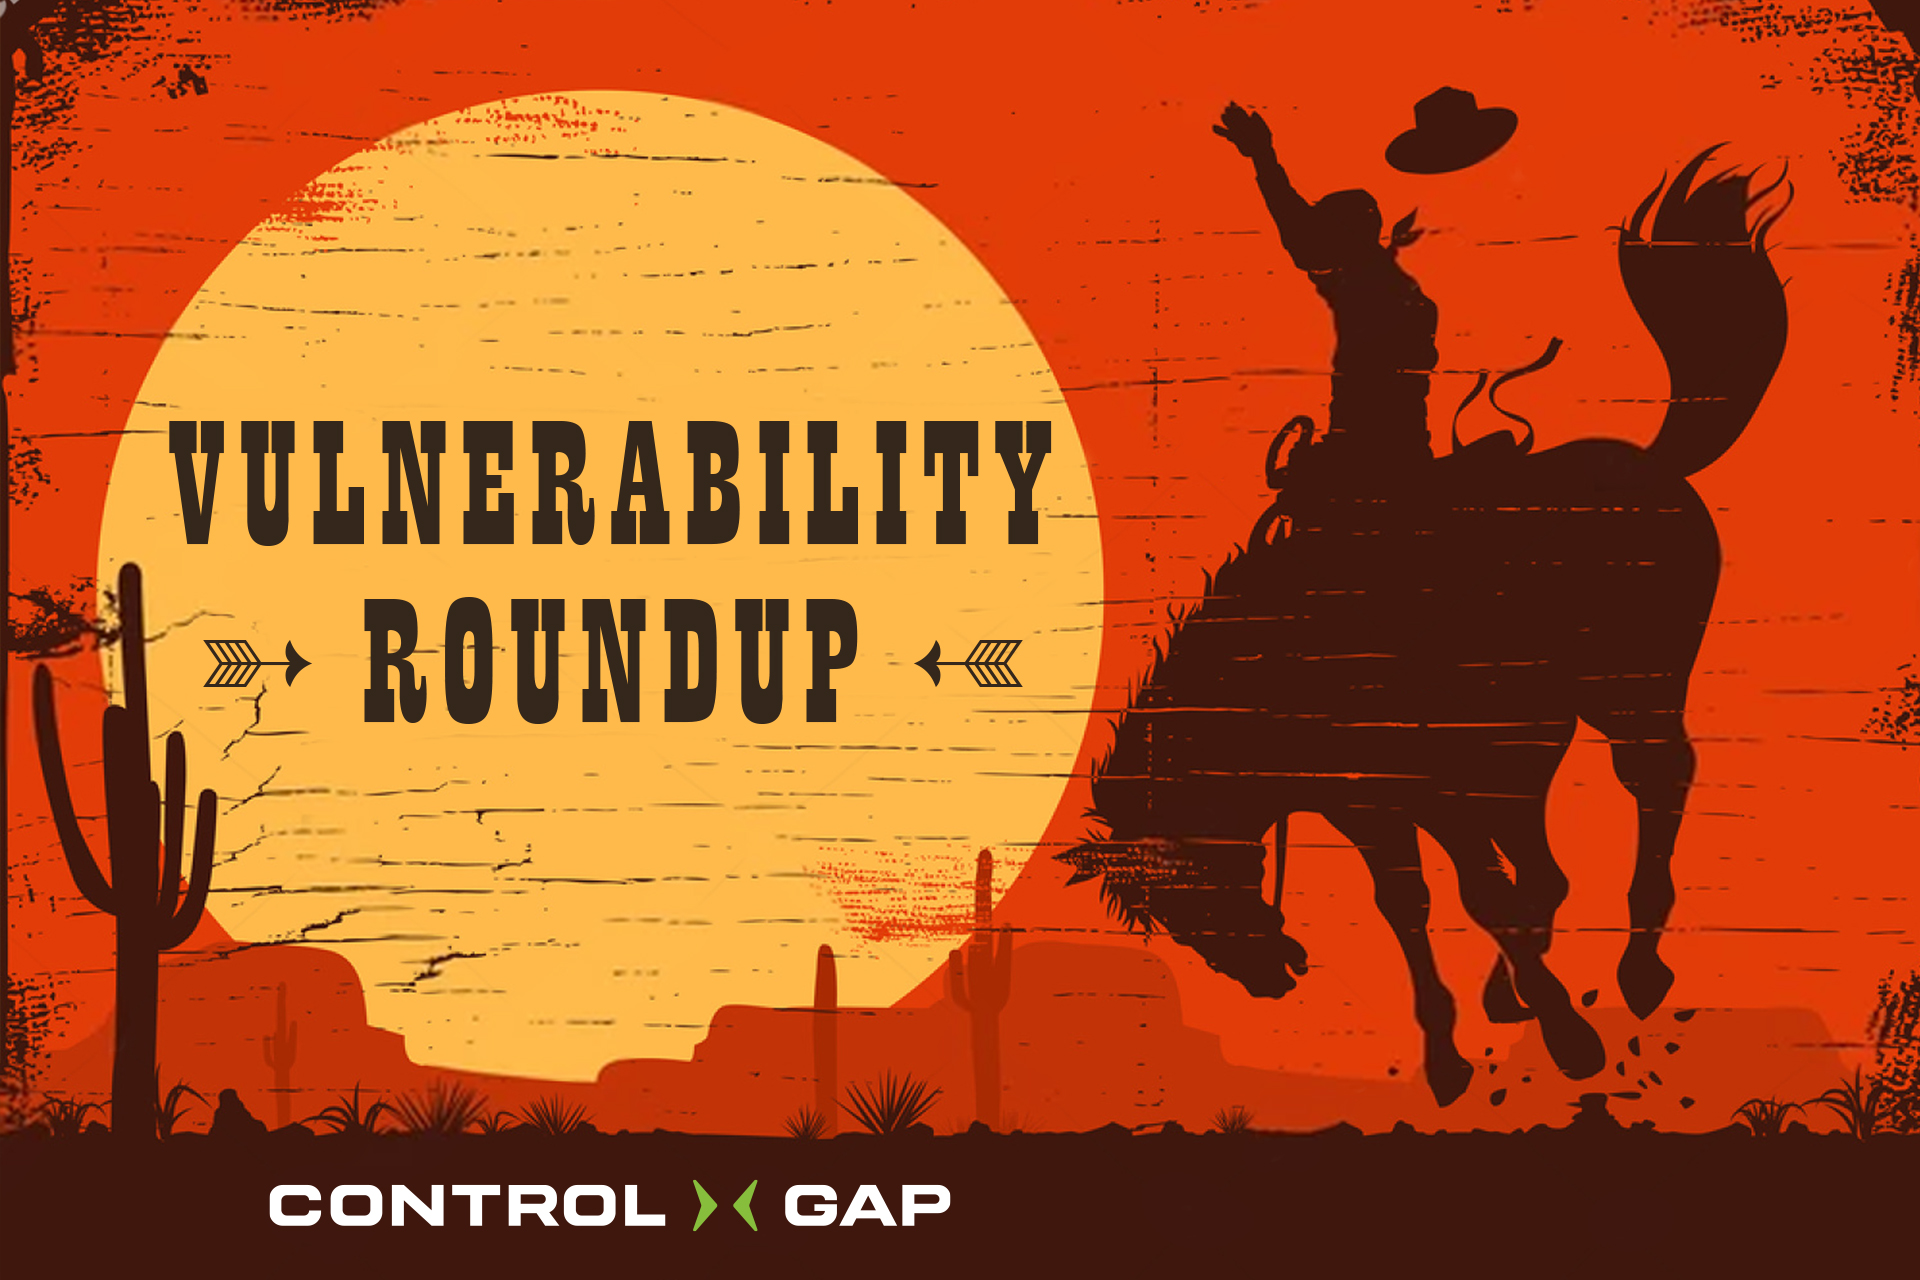 Control Gap Vulnerability Roundup: August 13th to August 19th